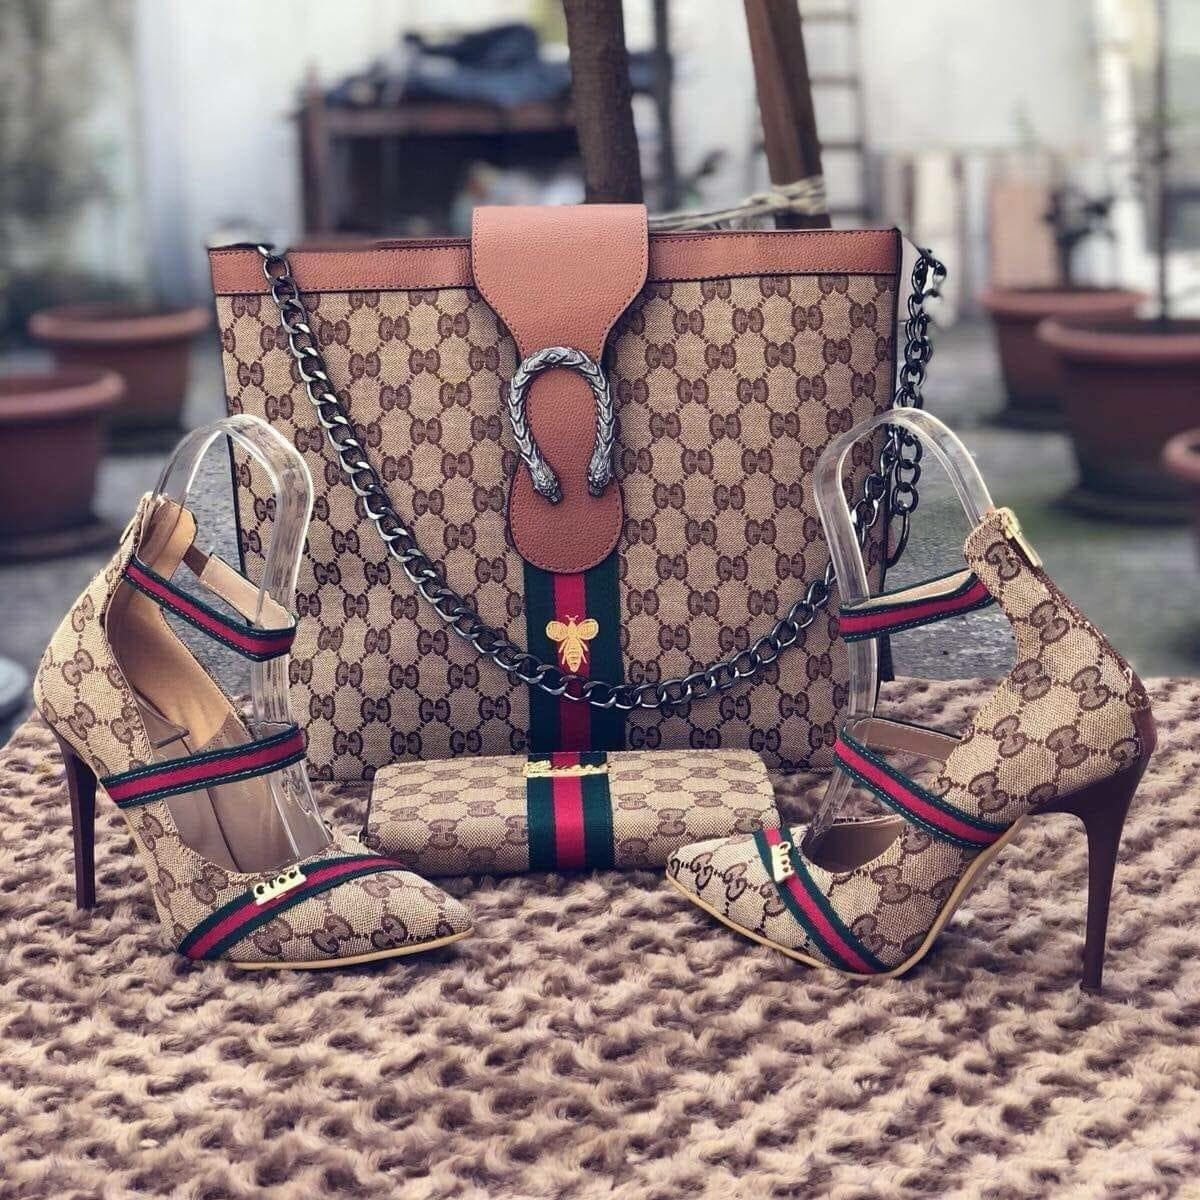 $72 · GUCCI SHOES WALLET AND BAG SET AVAILABLE FROM 36 TO 40 SIZES